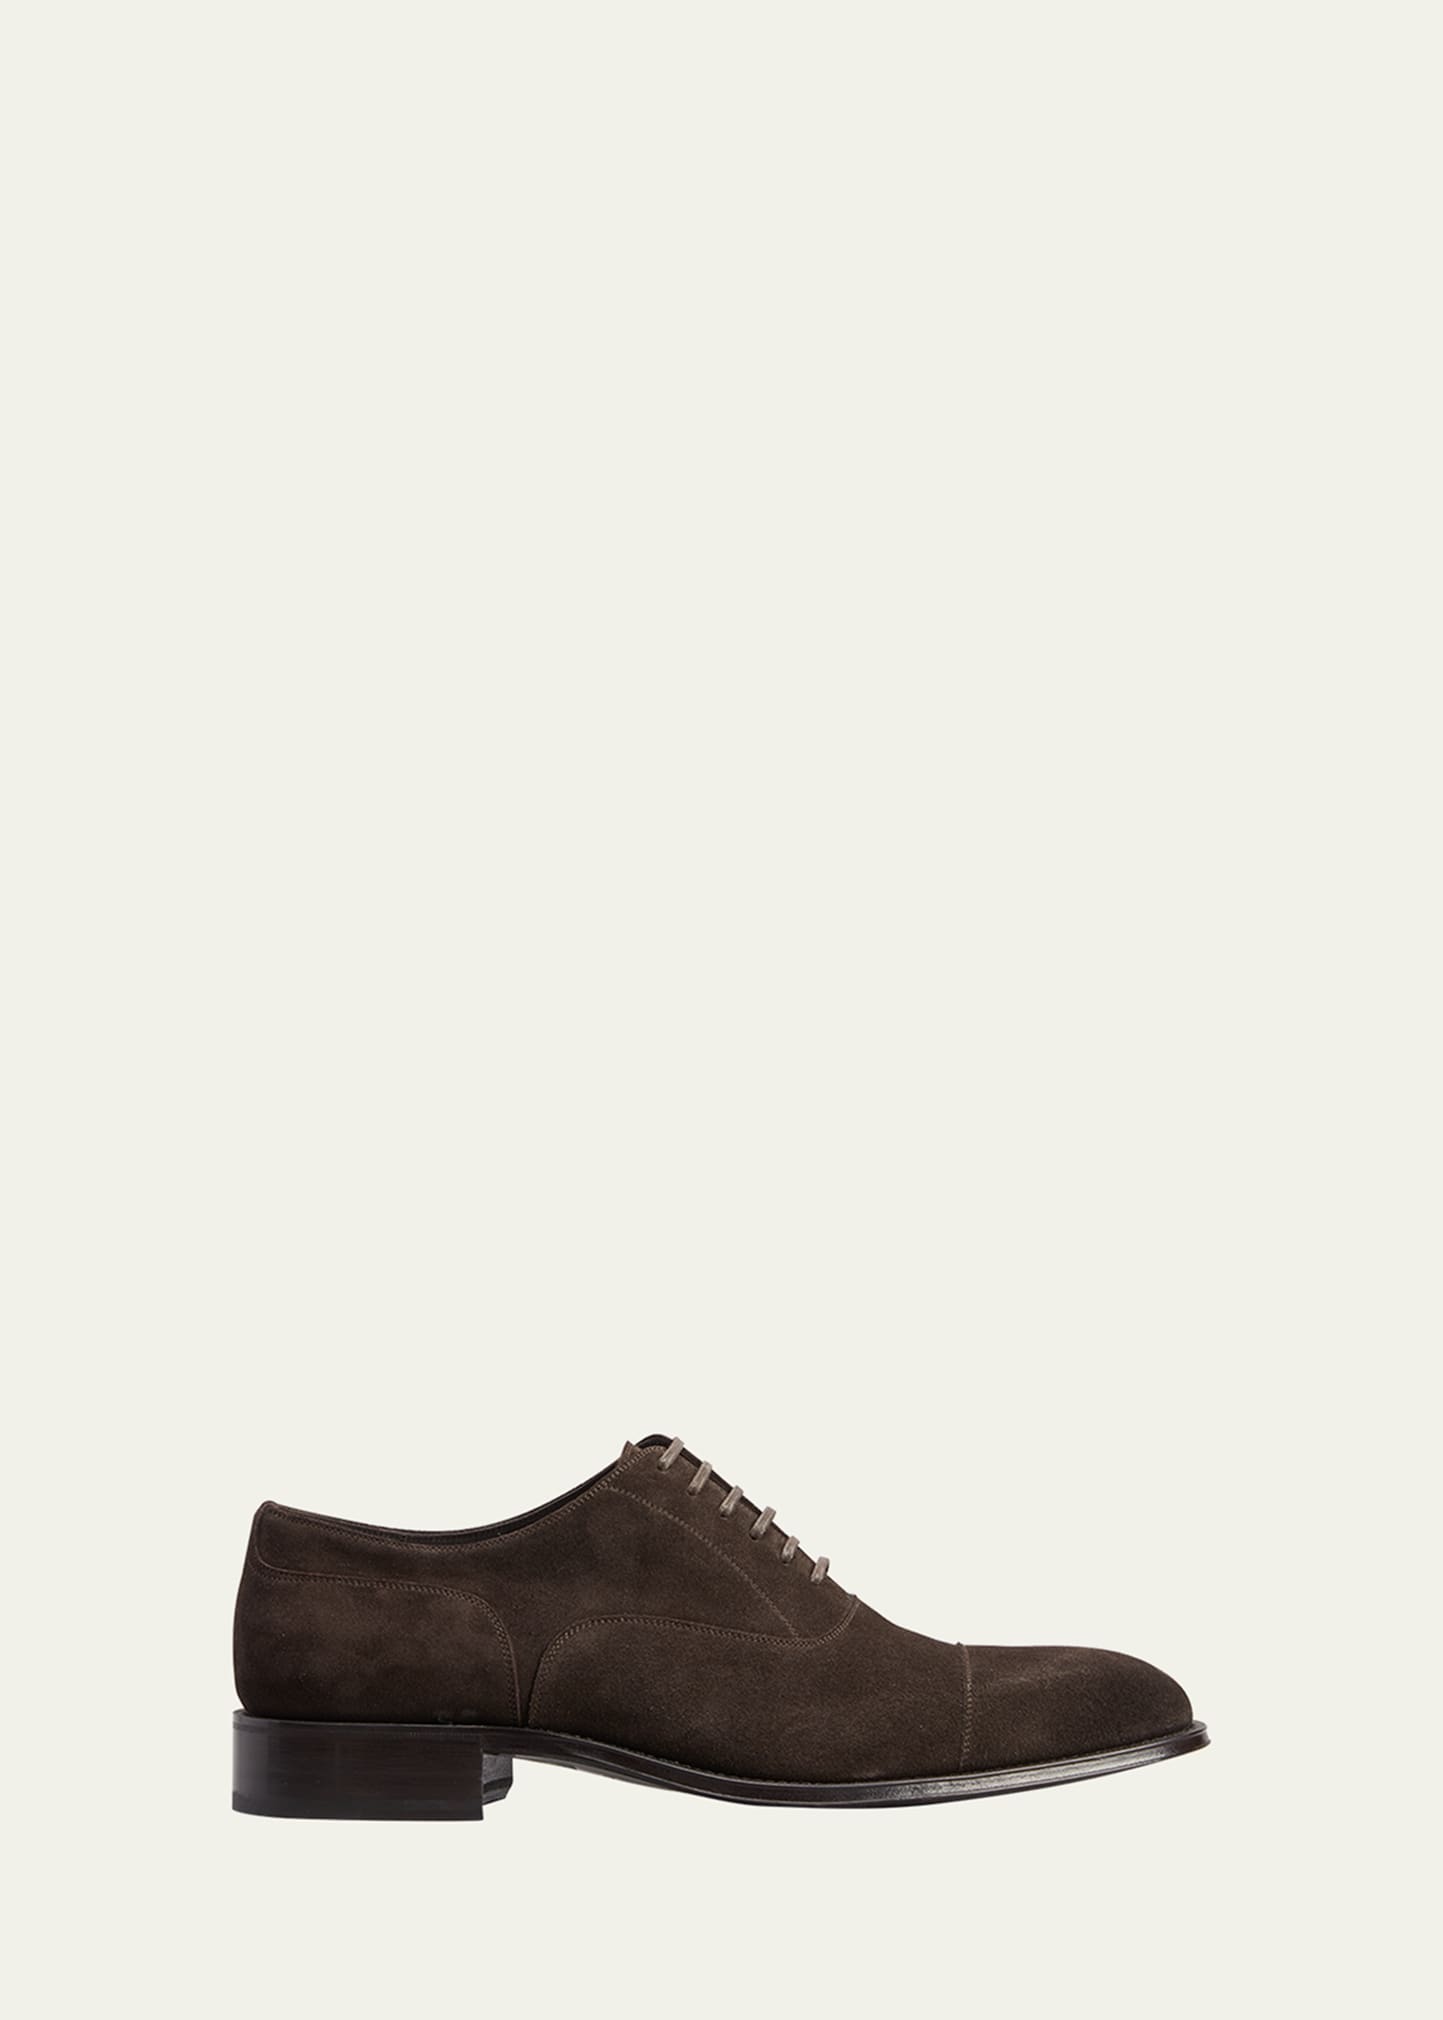 Tom Ford Men's Claydon Suede-leather Oxfords In Chocolate